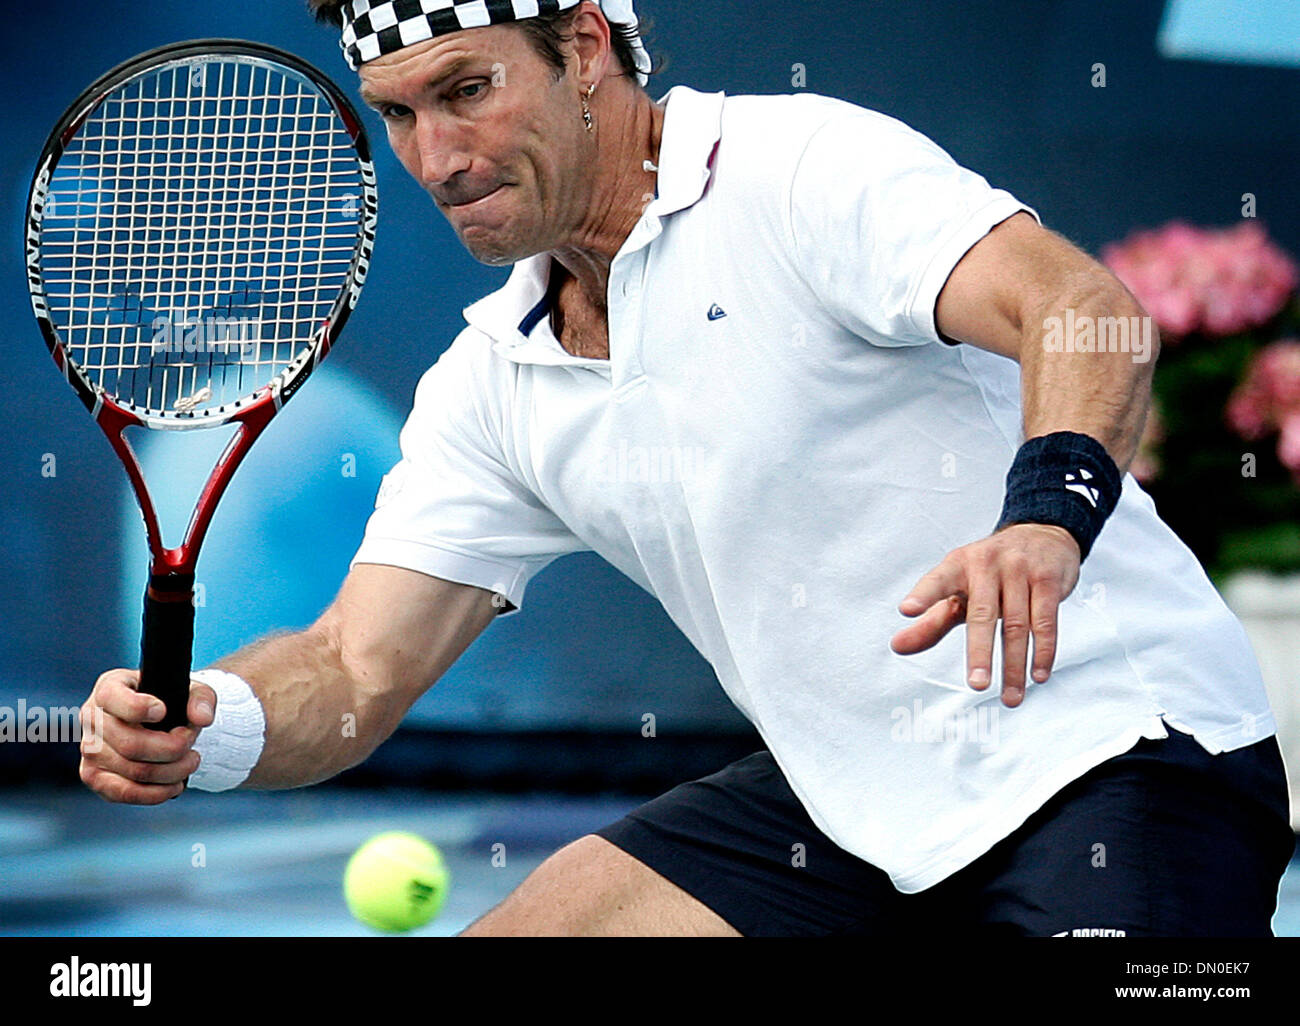 Feb. 20, 2010 - Delray, FL - Florida, USA - United States - fl-delray-champions-tennis-0220i   Pat Cash sets up a forehand return at the net against Patrick Rafter during a ATP Champions Tour match at the Delray Beach Tennis Center..  Photo/Michael Francis McElroy, for the South Floirda Sun-Sentinel (Credit Image: © Sun-Sentinel/ZUMApress.com) Stock Photo